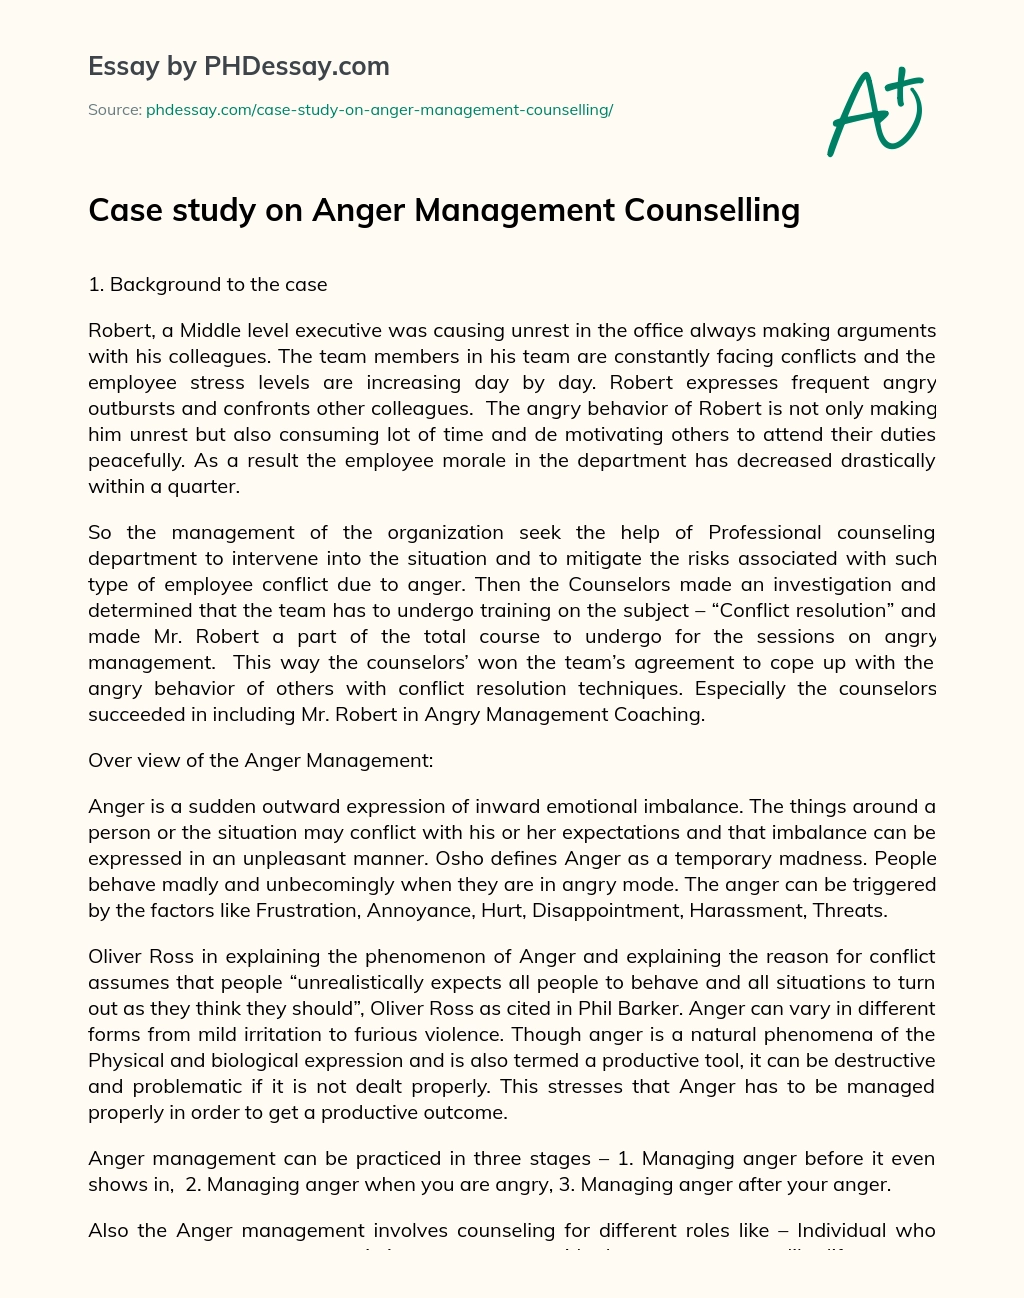 Case study on Anger Management Counselling essay